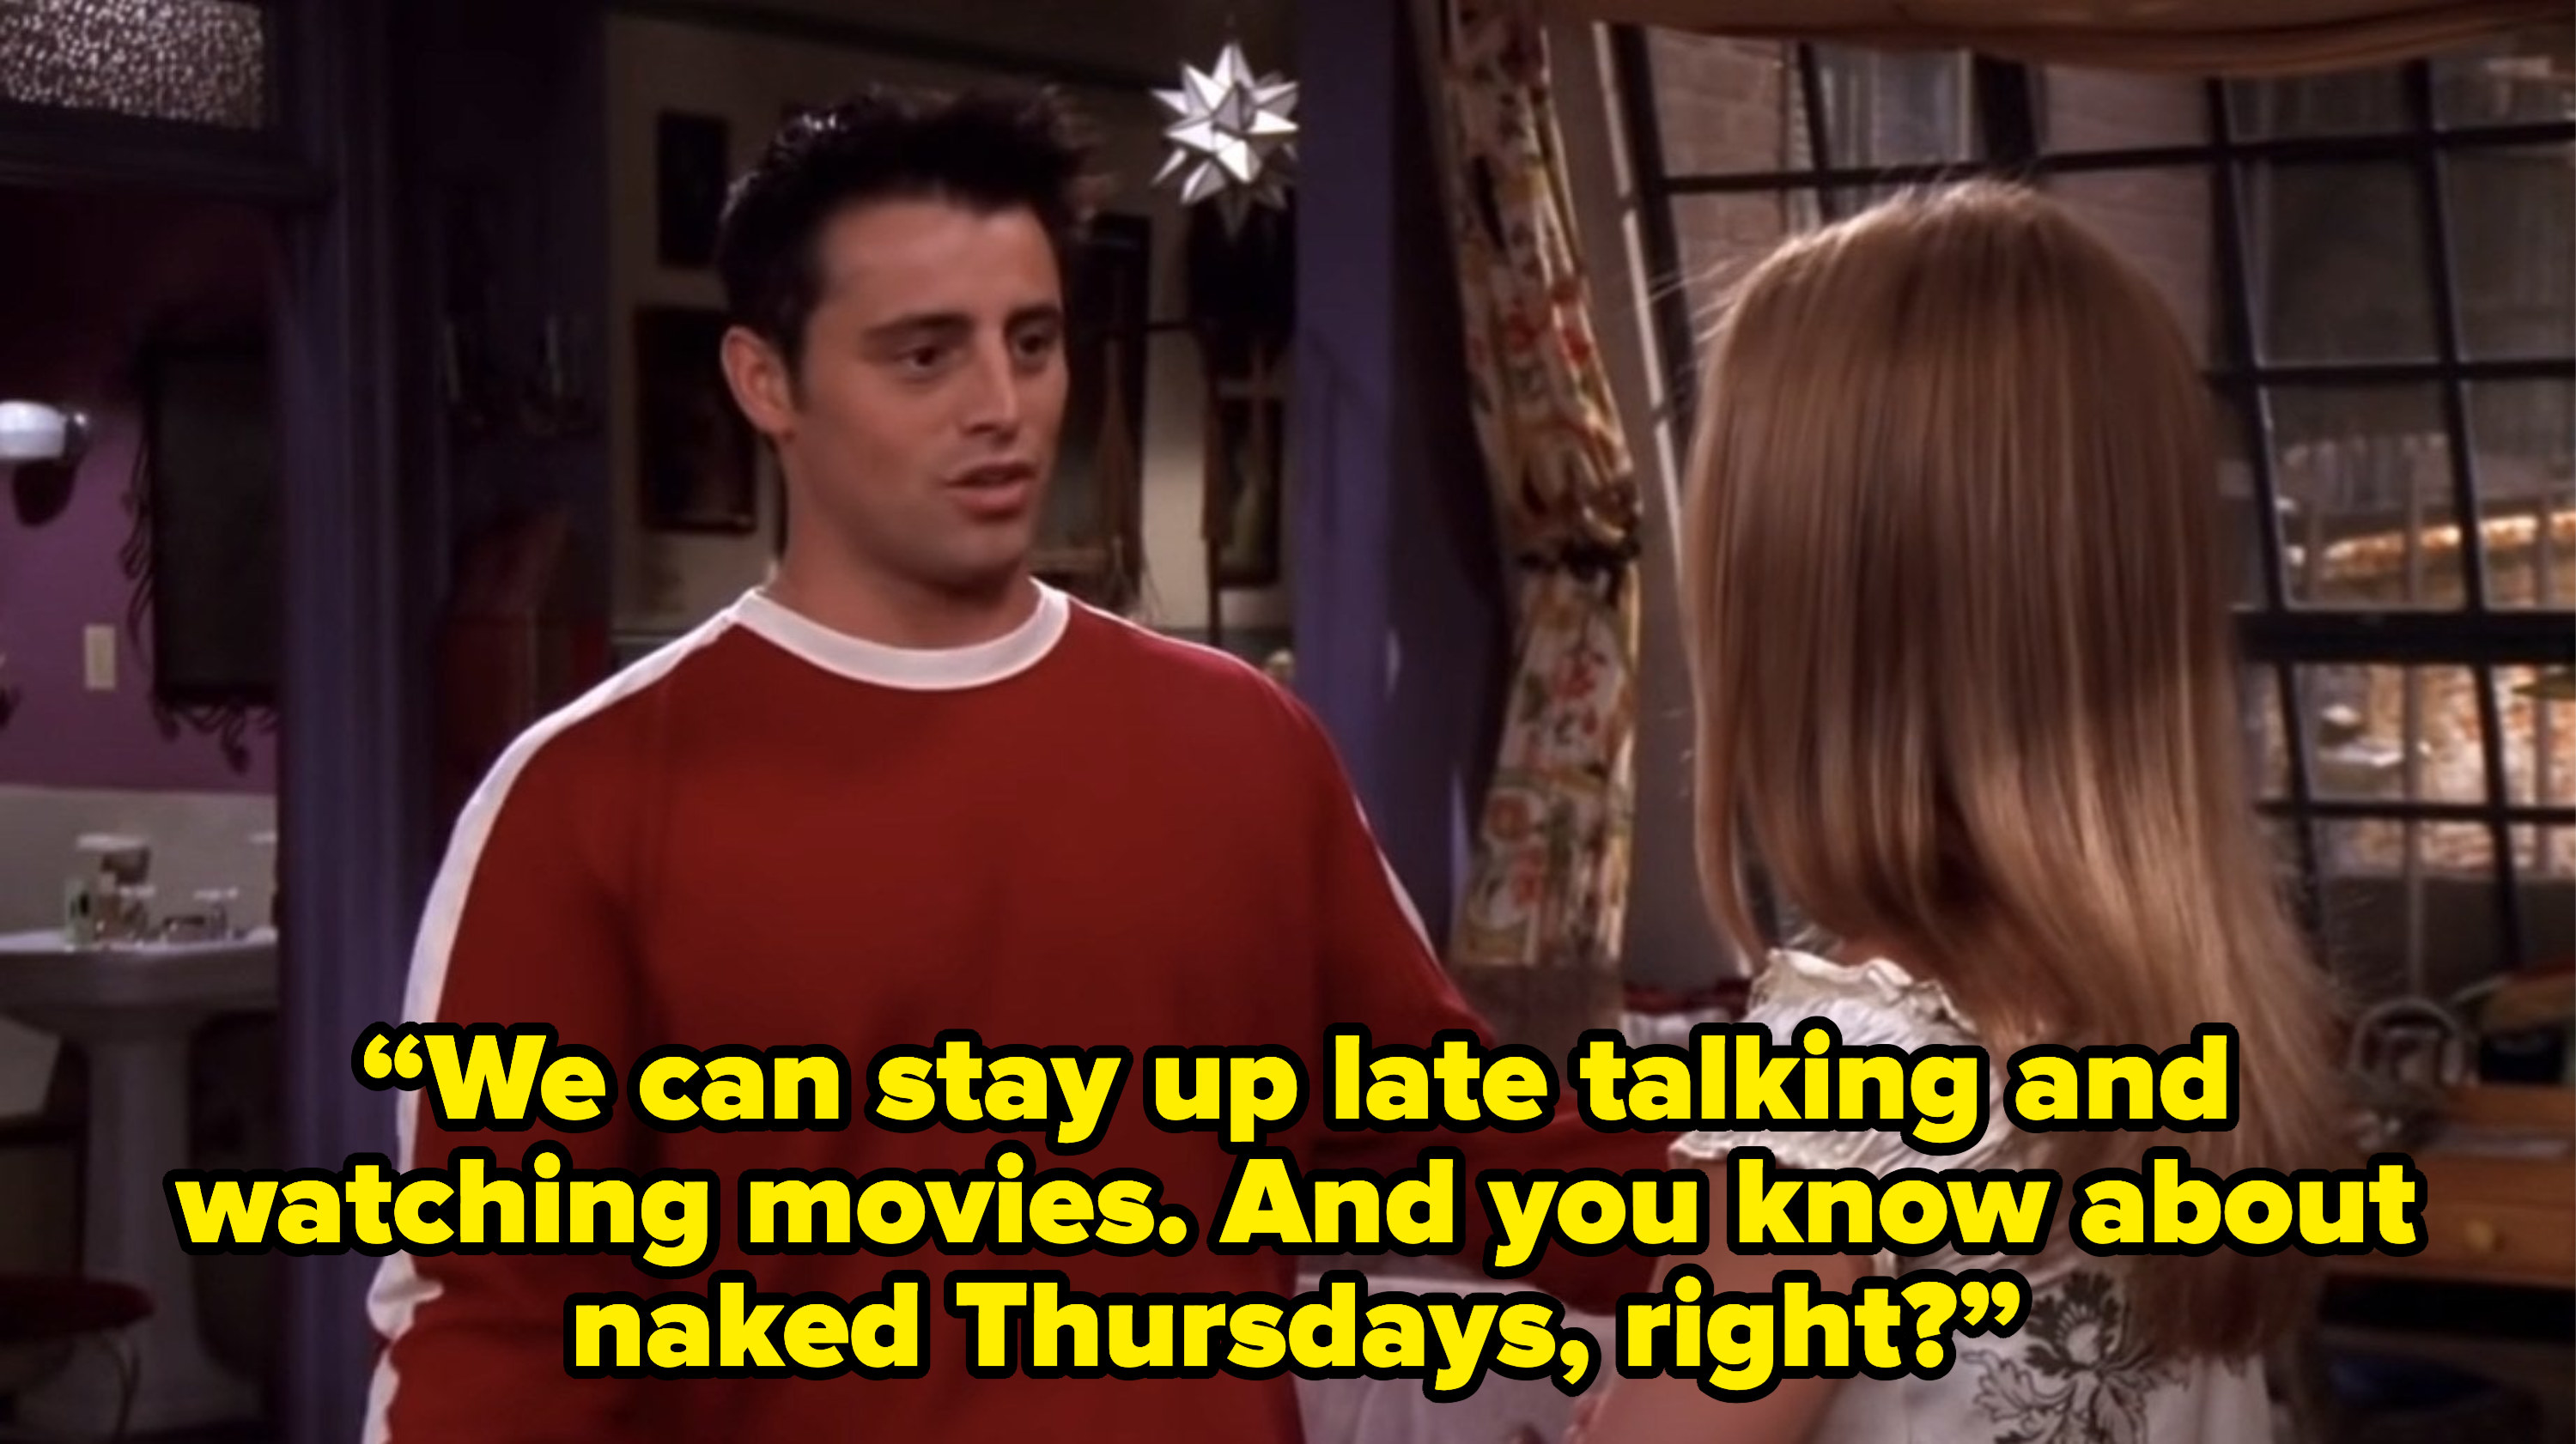 joey telling rachel “We can stay up late talking and watching movies. And you know about naked Thursdays, right?” on friends